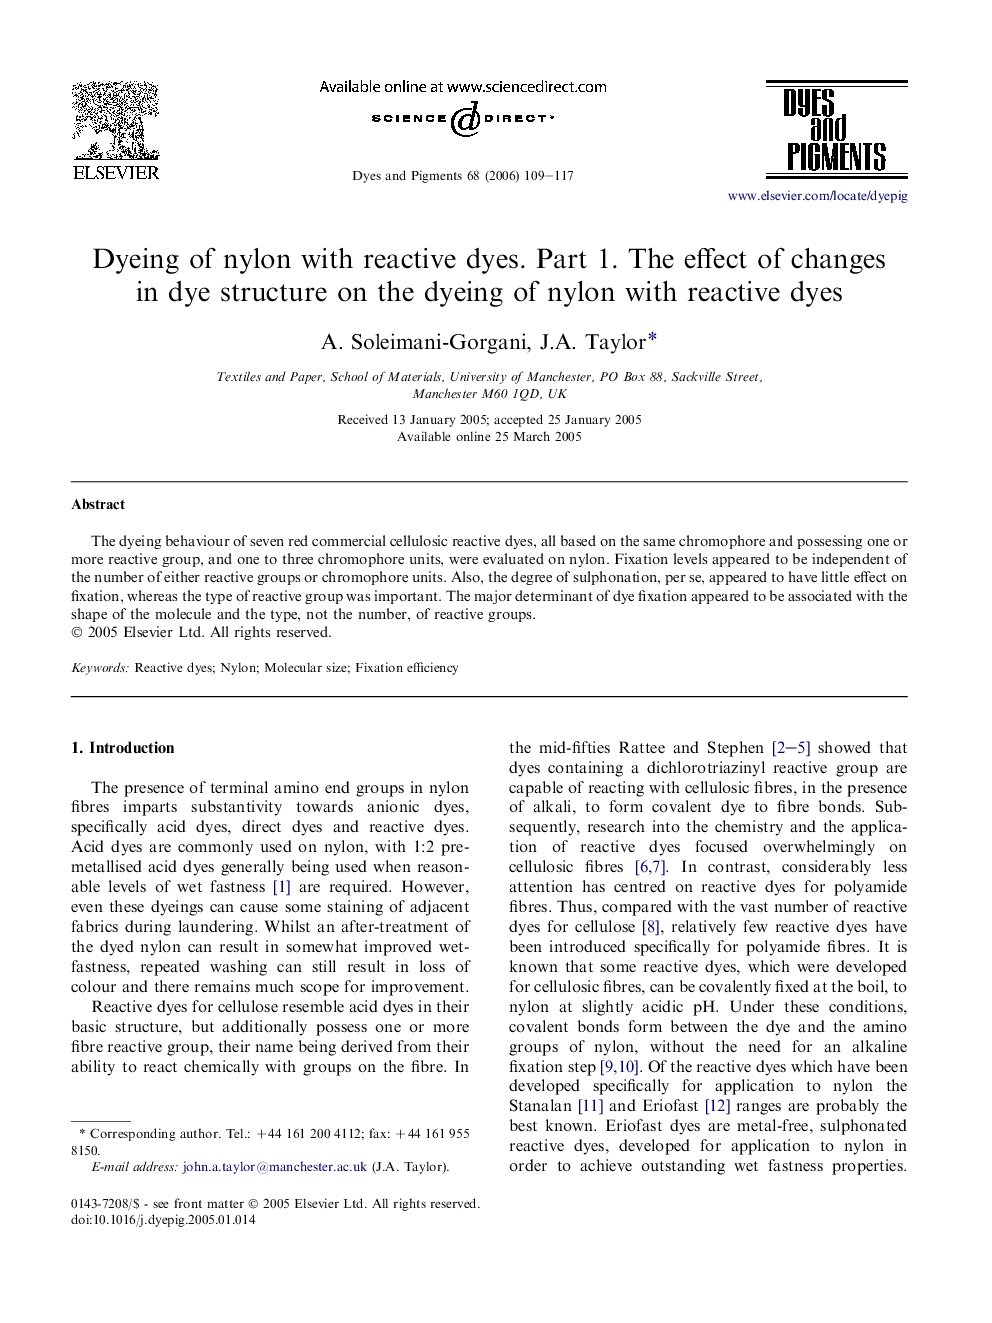 Dyeing of nylon with reactive dyes. Part 1. The effect of changes in dye structure on the dyeing of nylon with reactive dyes